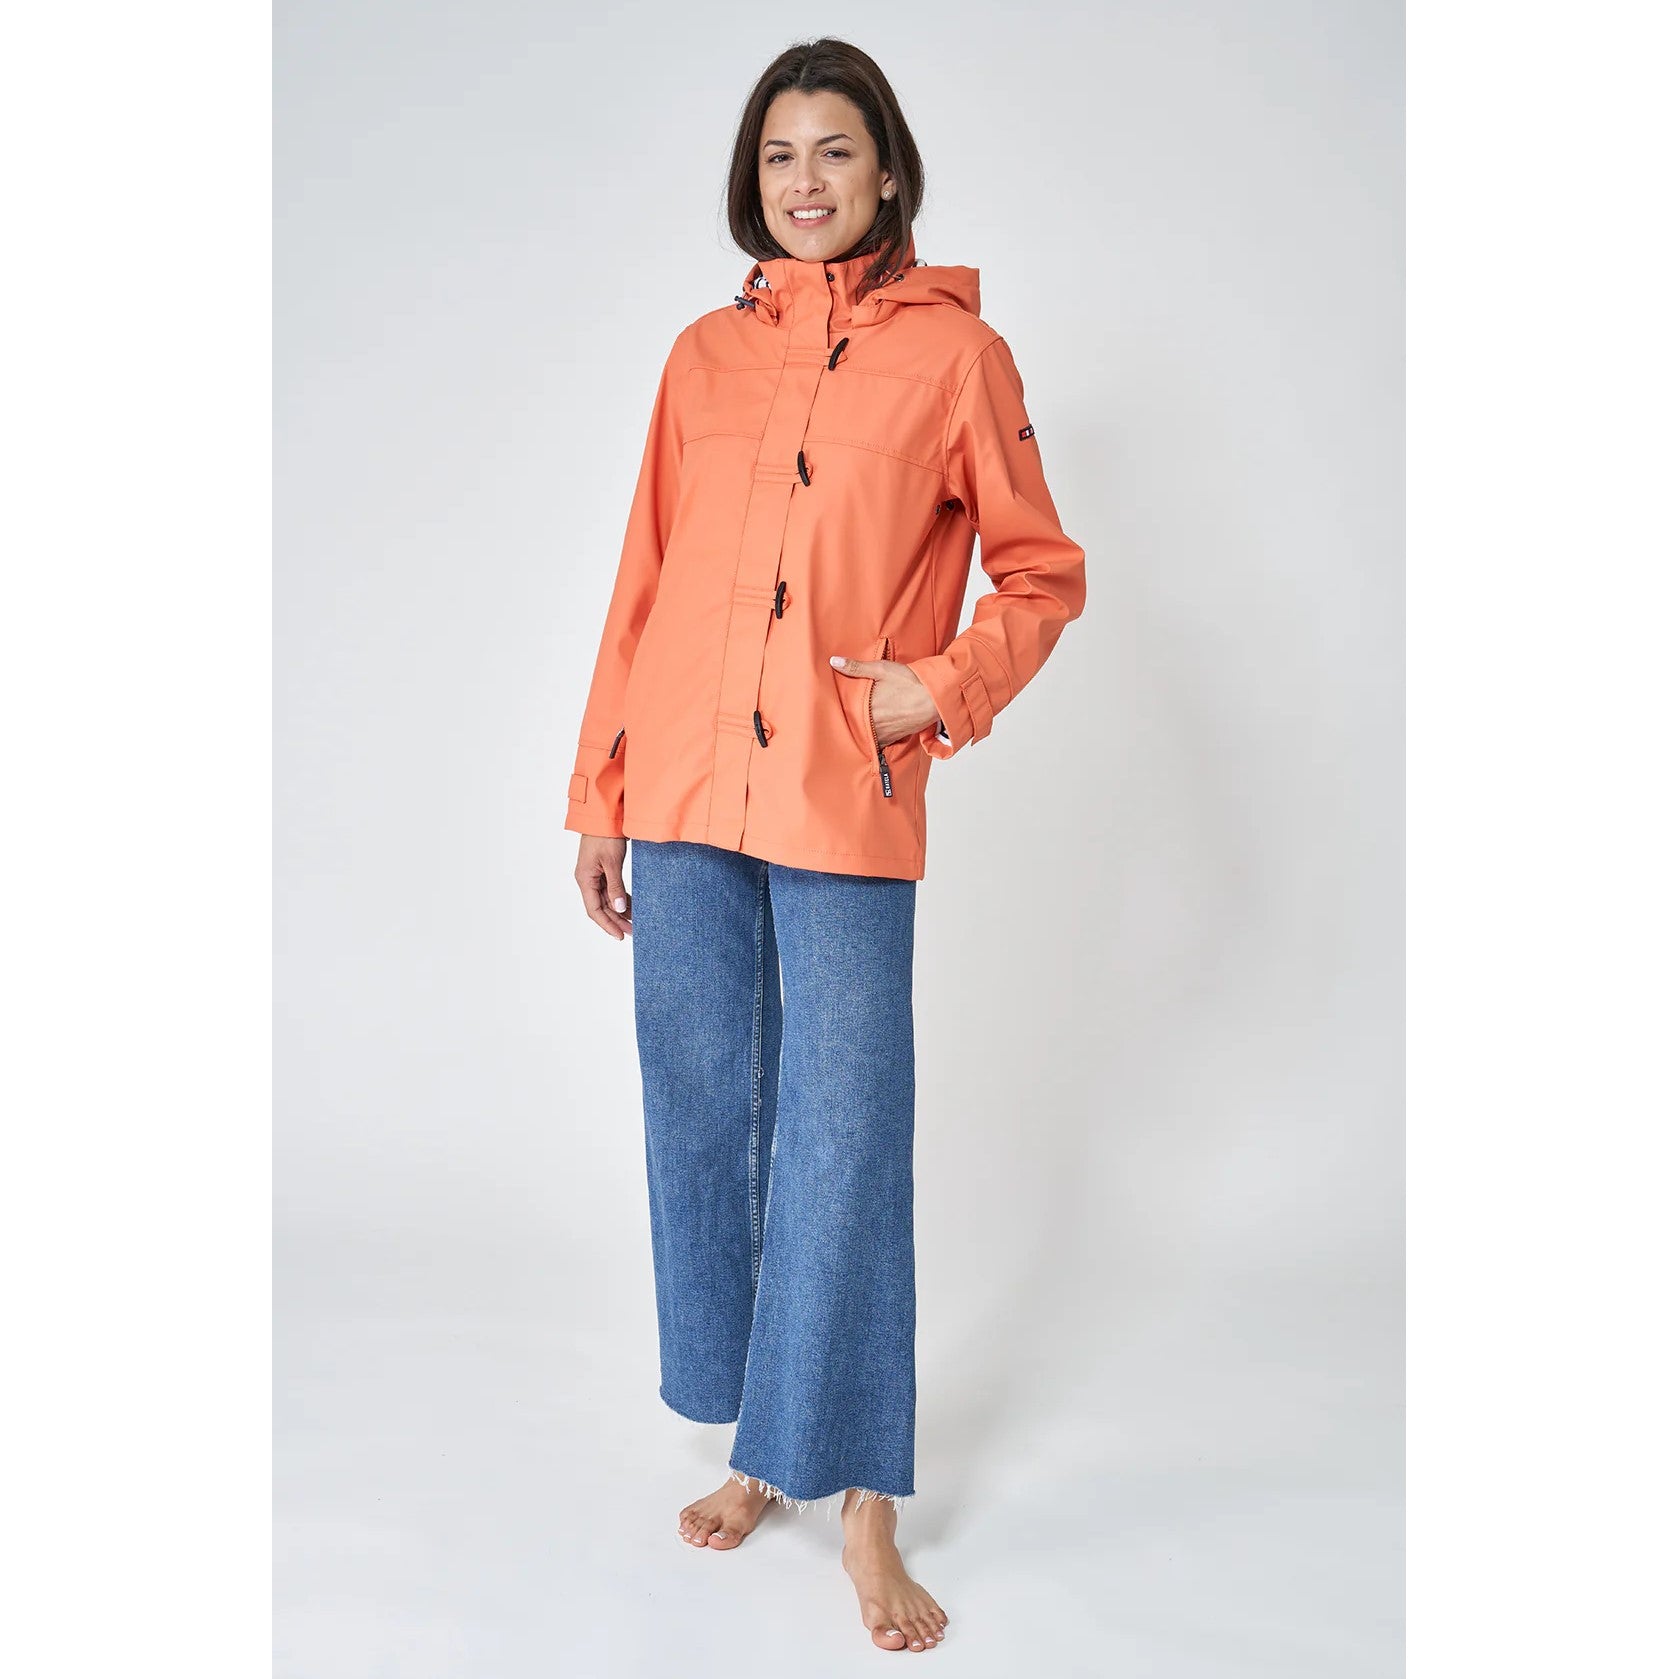 Nautical Raincoat with Striped Lining for Women